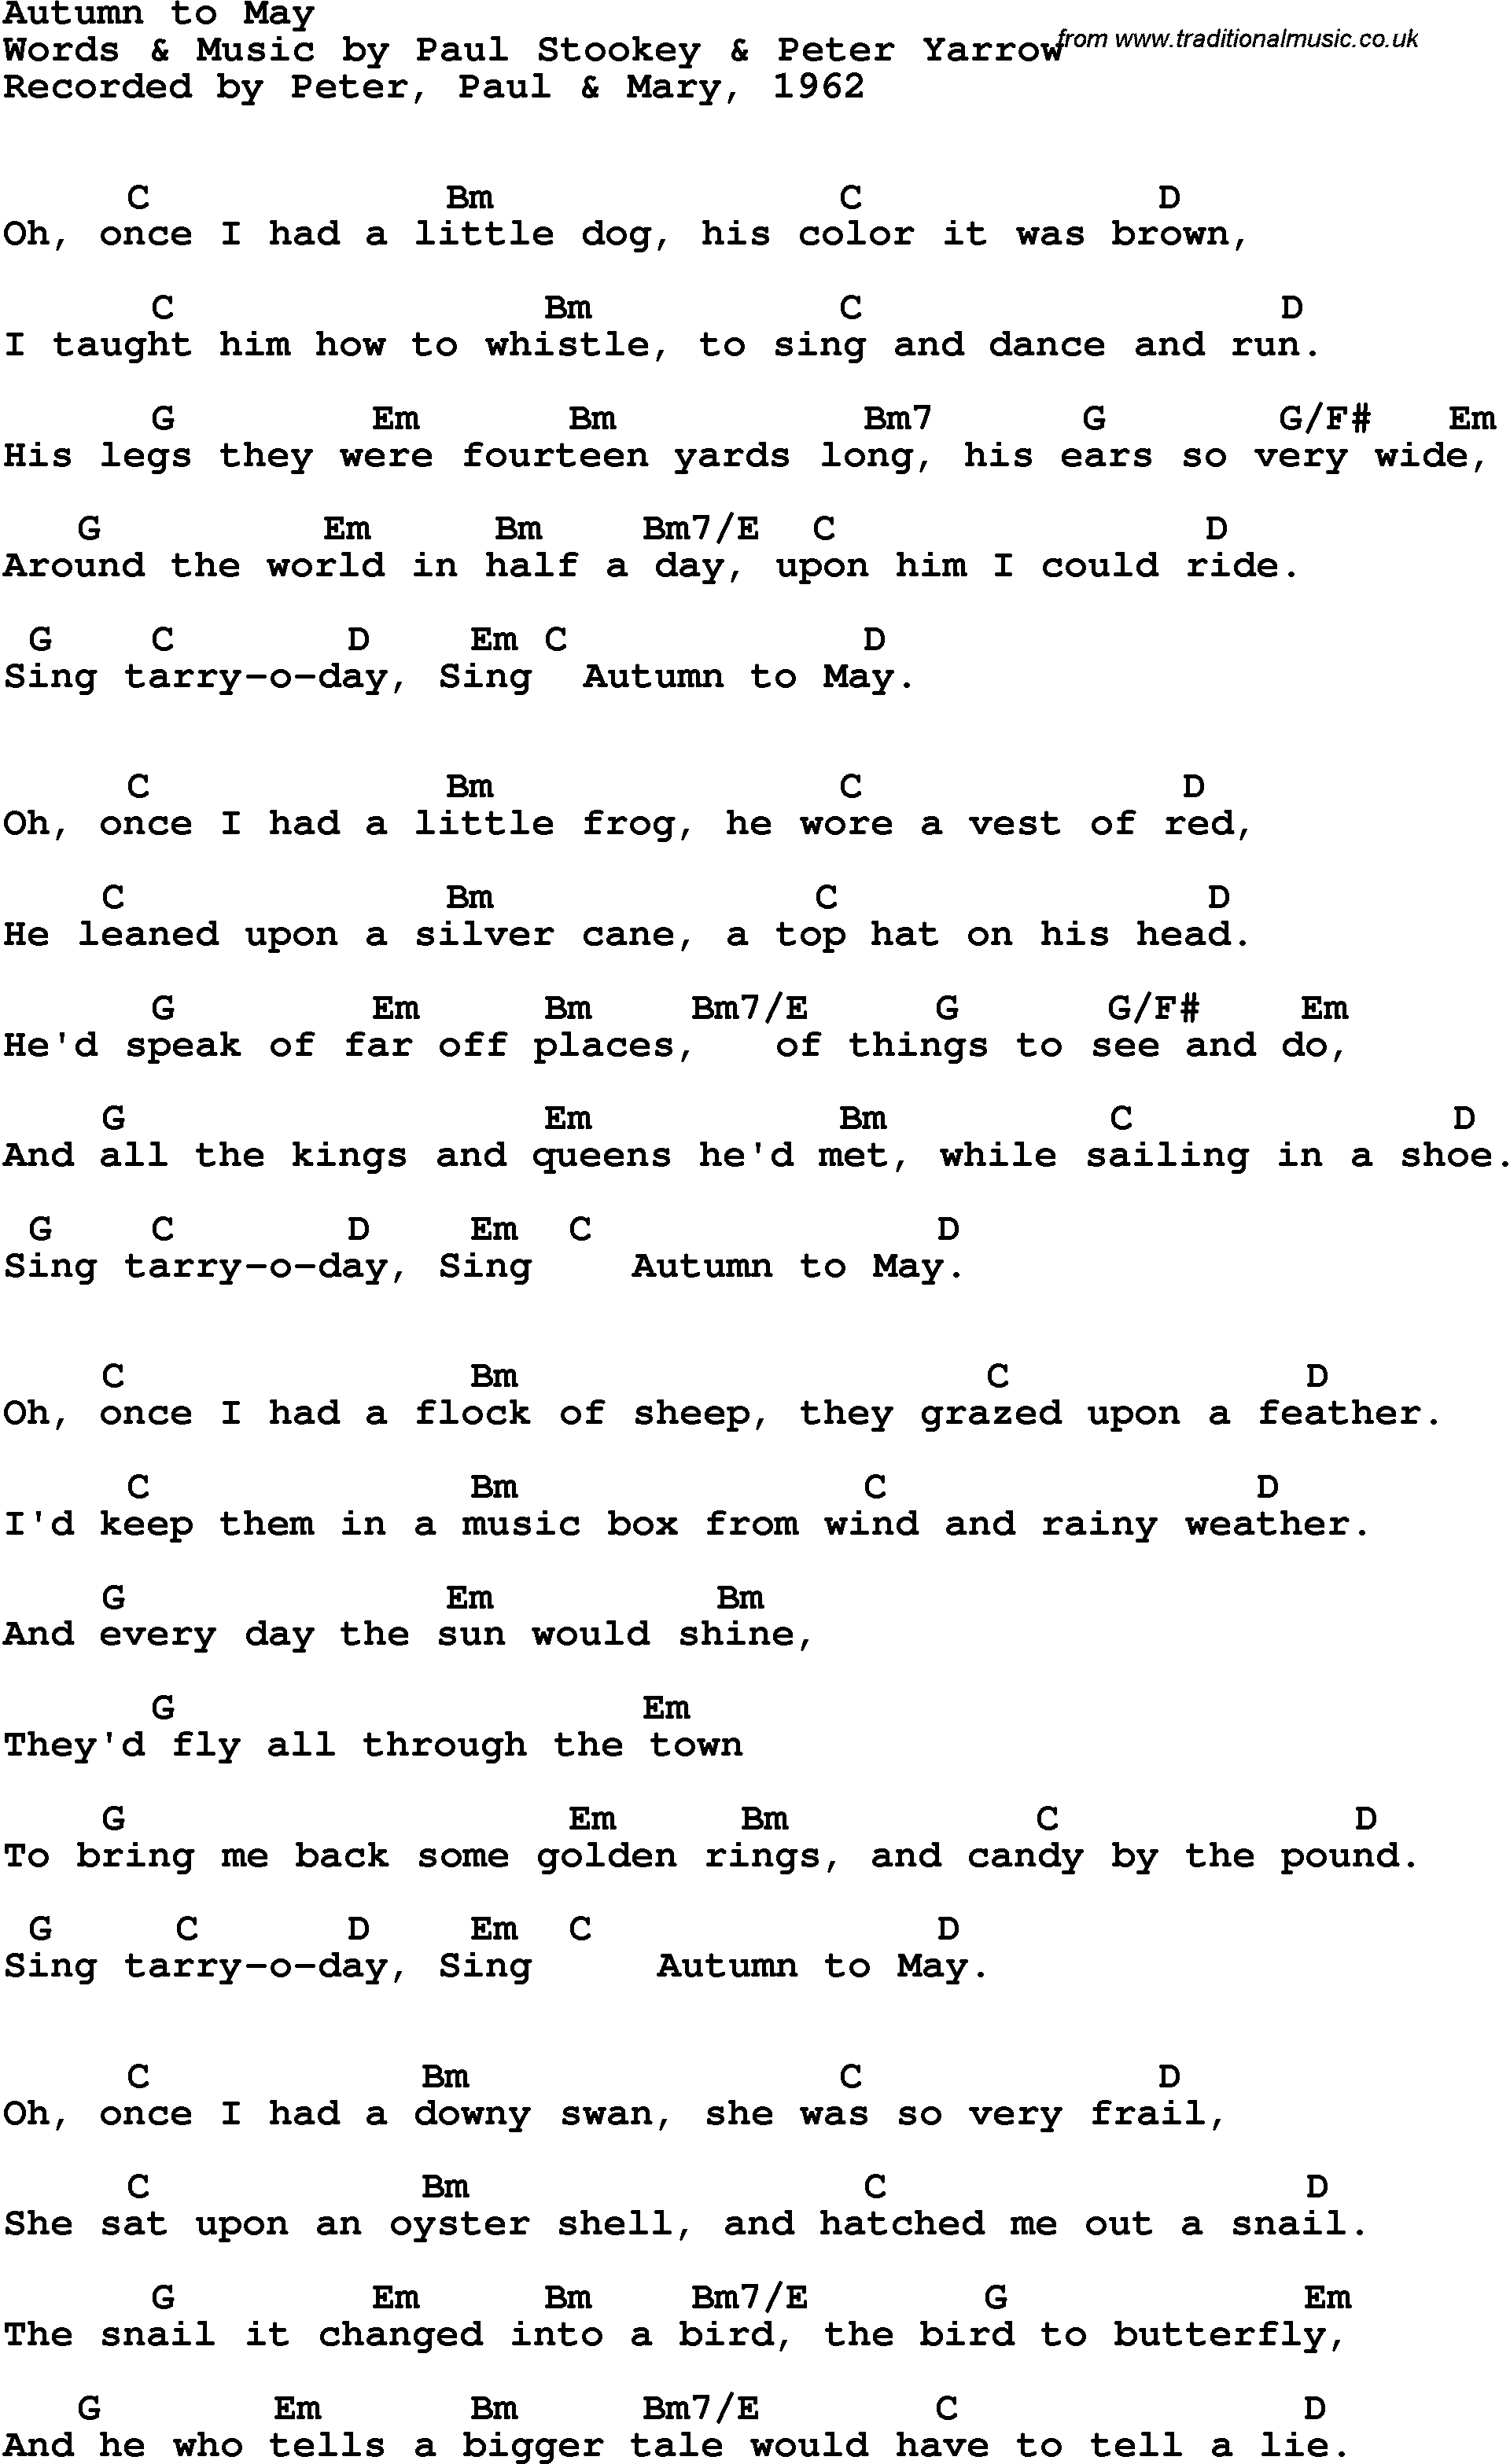 Song Lyrics with guitar chords for Autumn To May - Peter, Paul & Mary, 1962